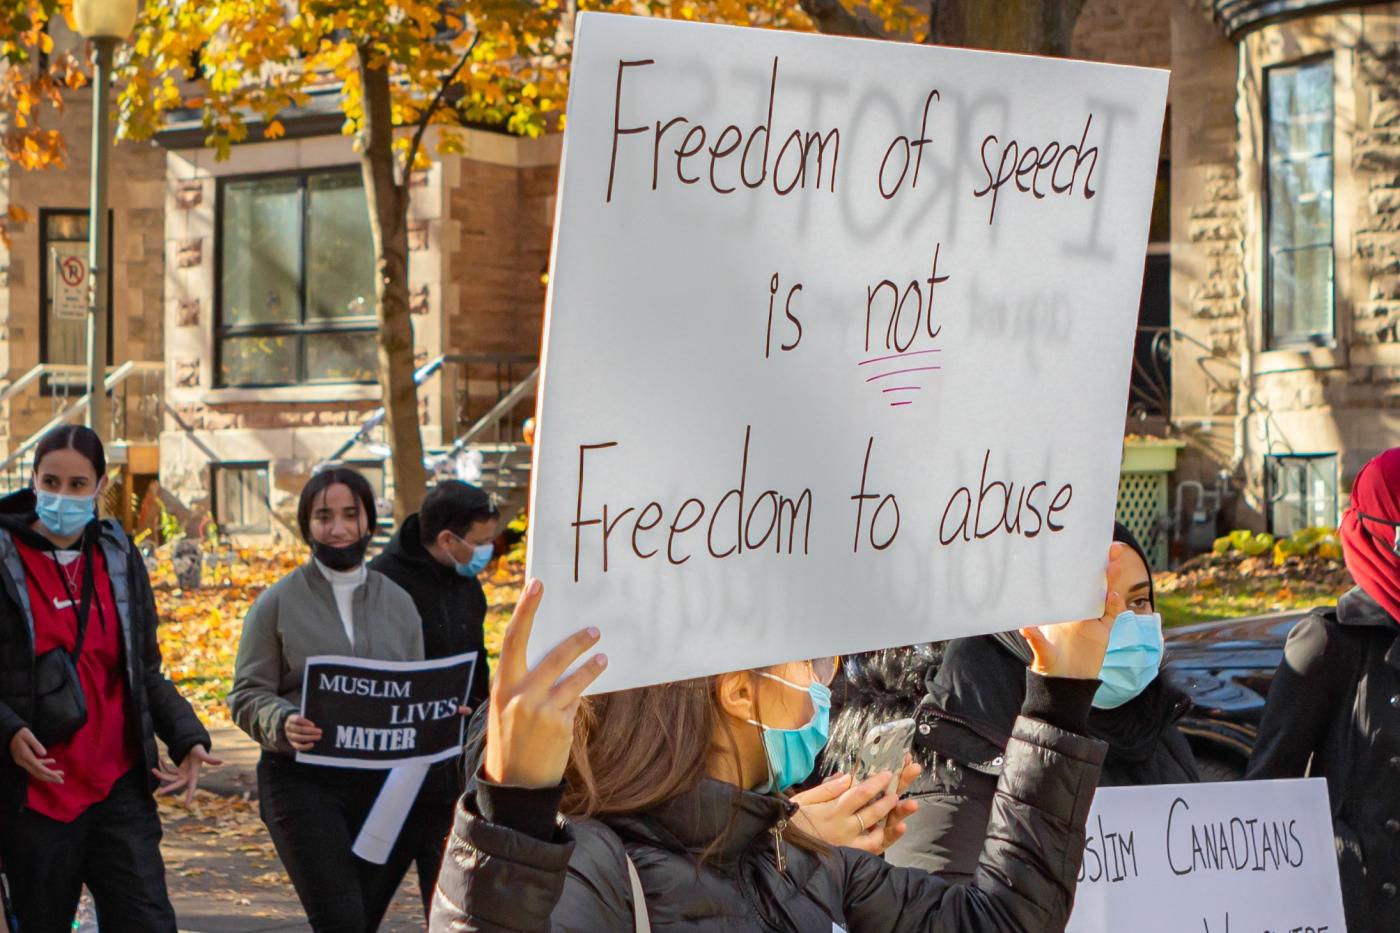 A protest sign reads: "Freedom of speech is not freedom to abuse" in Montreal, Canada, on 31 October (Reuters)